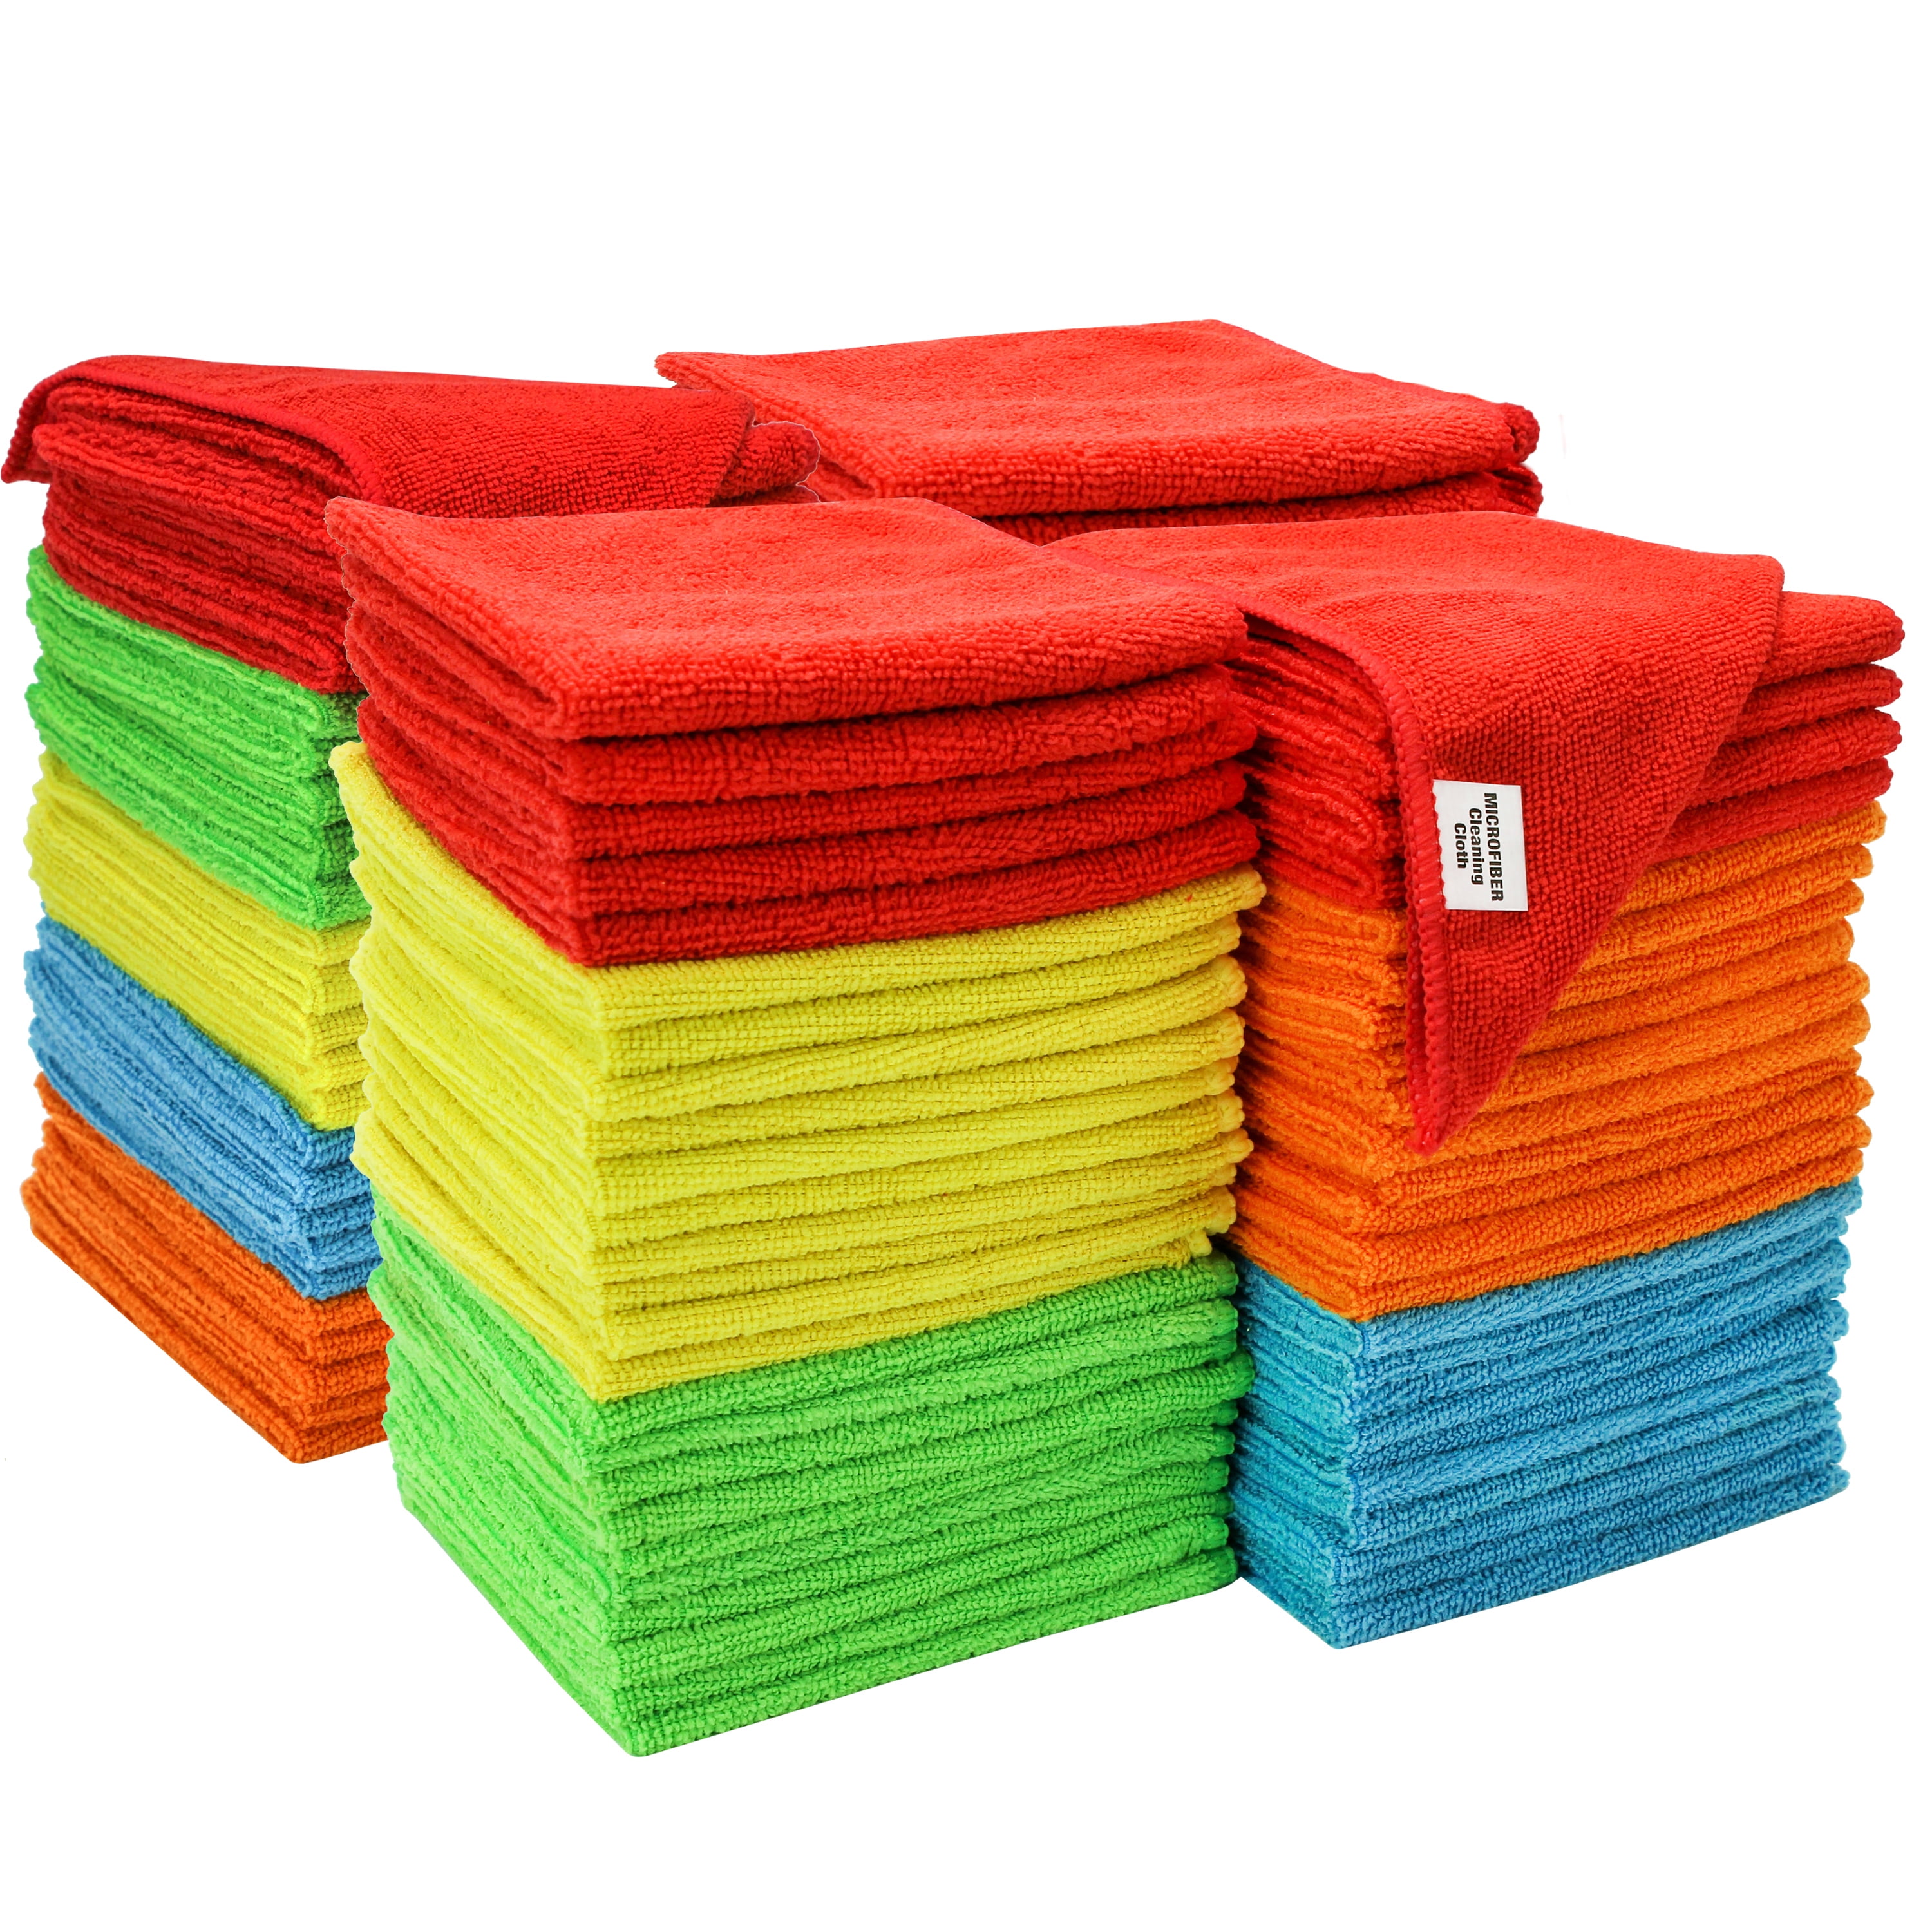 Microfiber Cleaning Cloths  Schroeder And Tremayne 2 sets of 10 each 